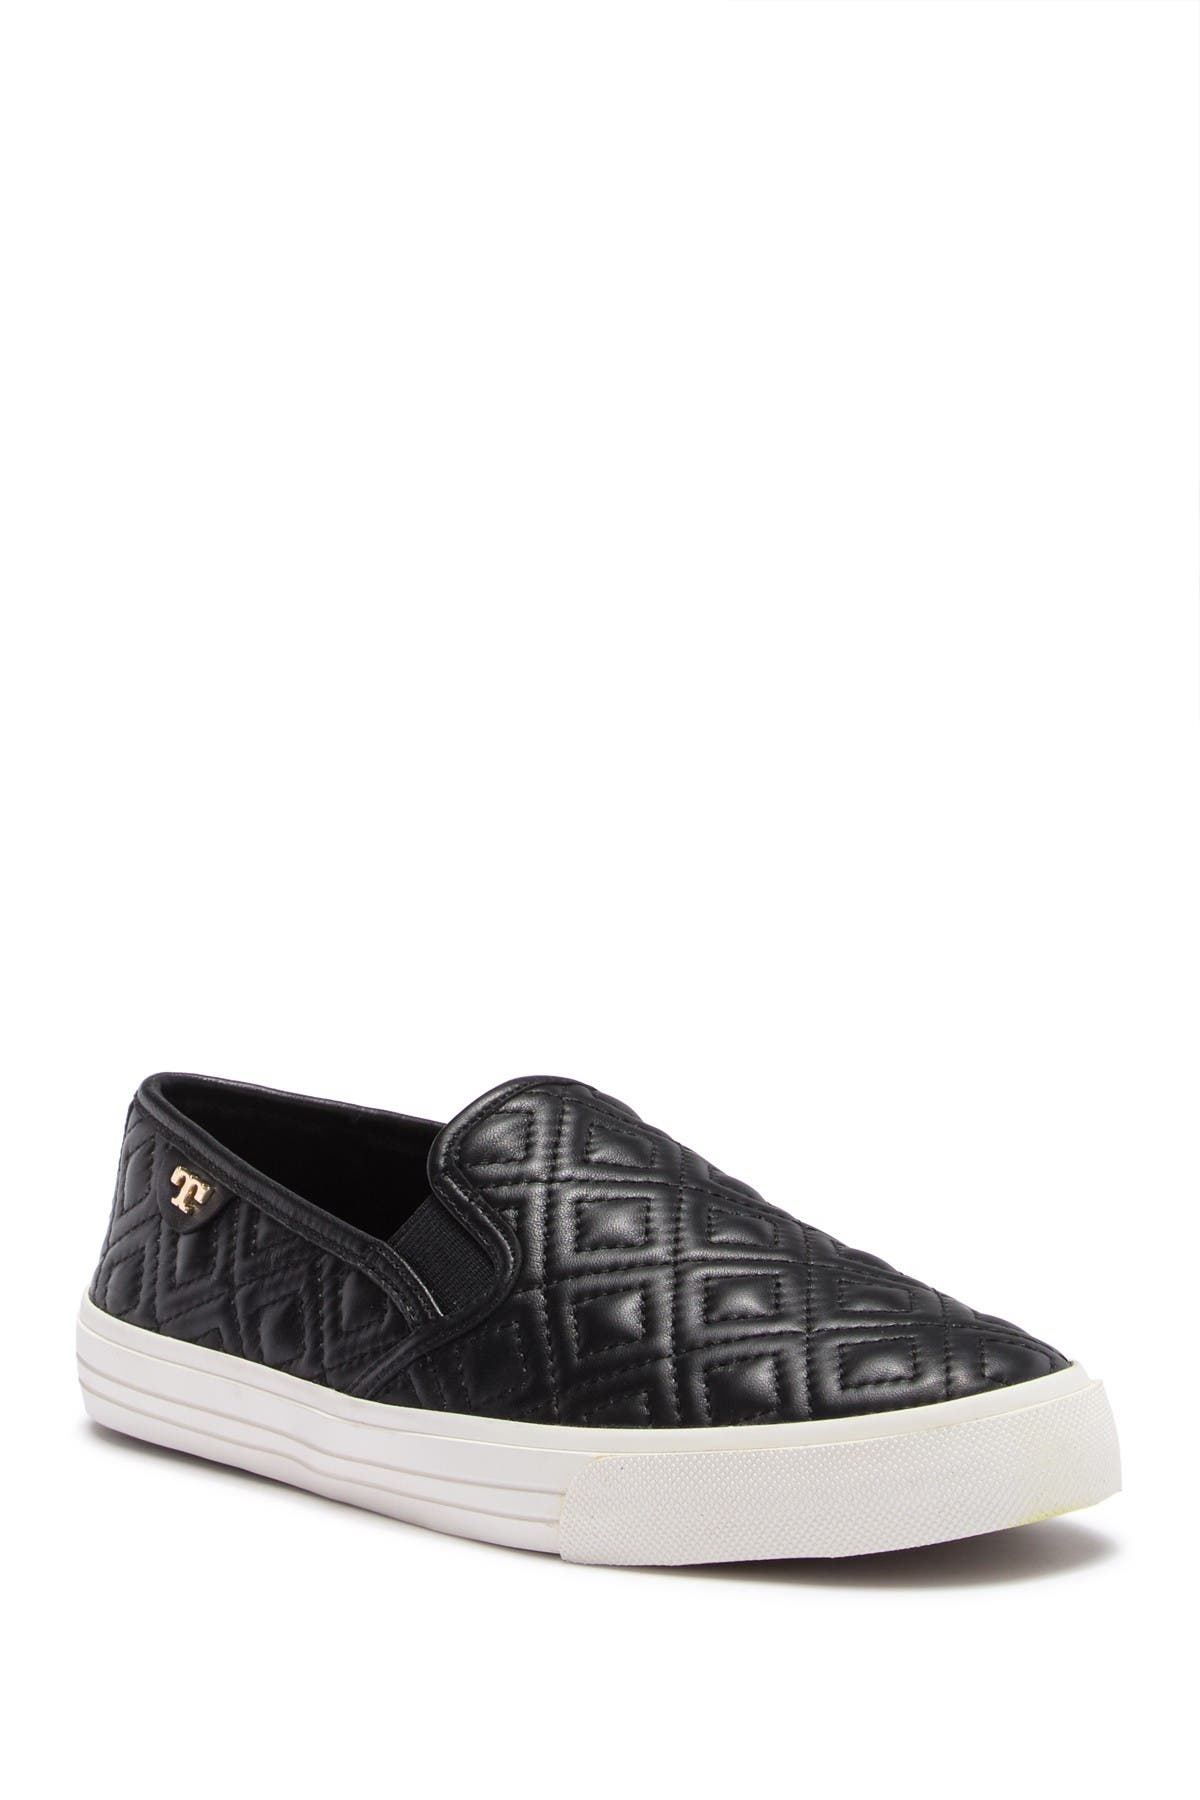 Tory Burch | Jesse Quilted Sneaker 